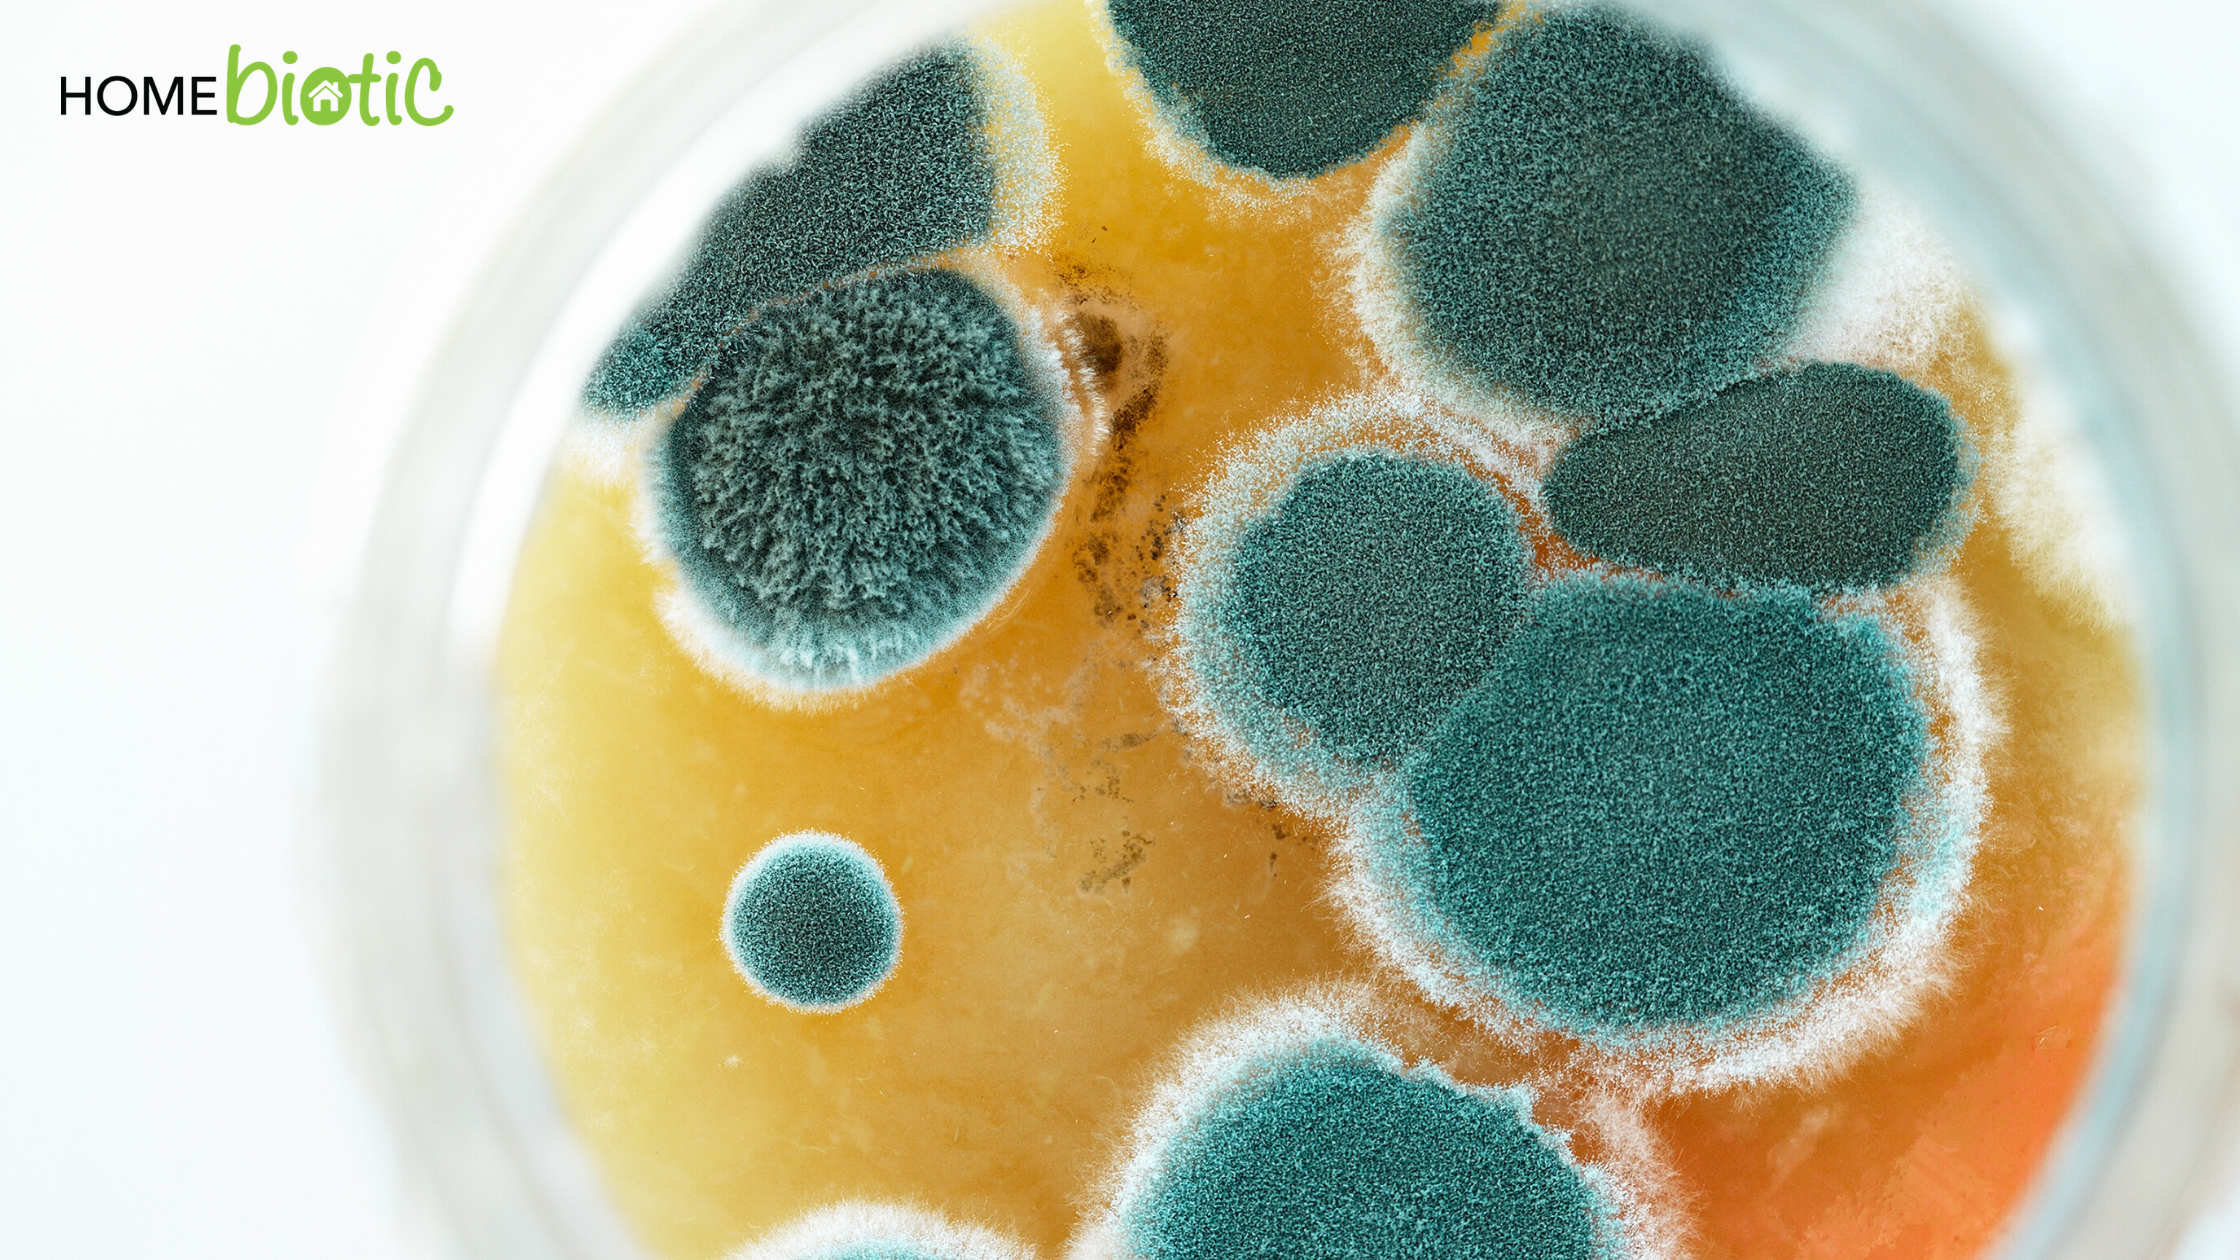 Types of Mold: Cladosporium | Close up view of mold growing in a tray